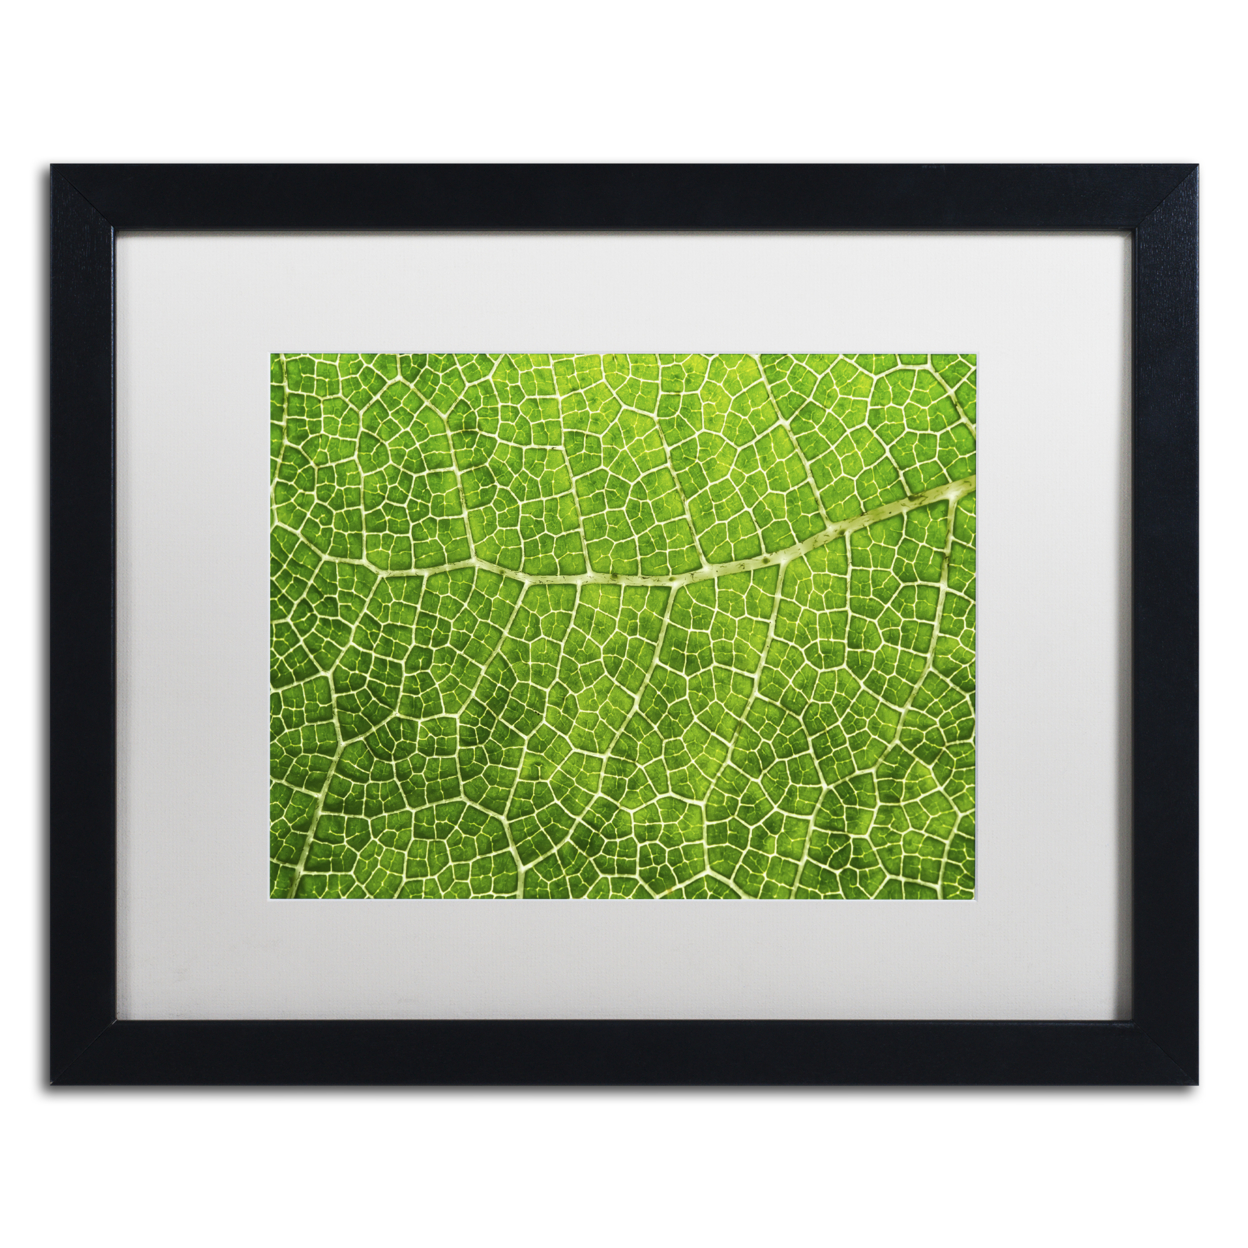 Cora Niele 'Green Leaf Texture' Black Wooden Framed Art 18 X 22 Inches